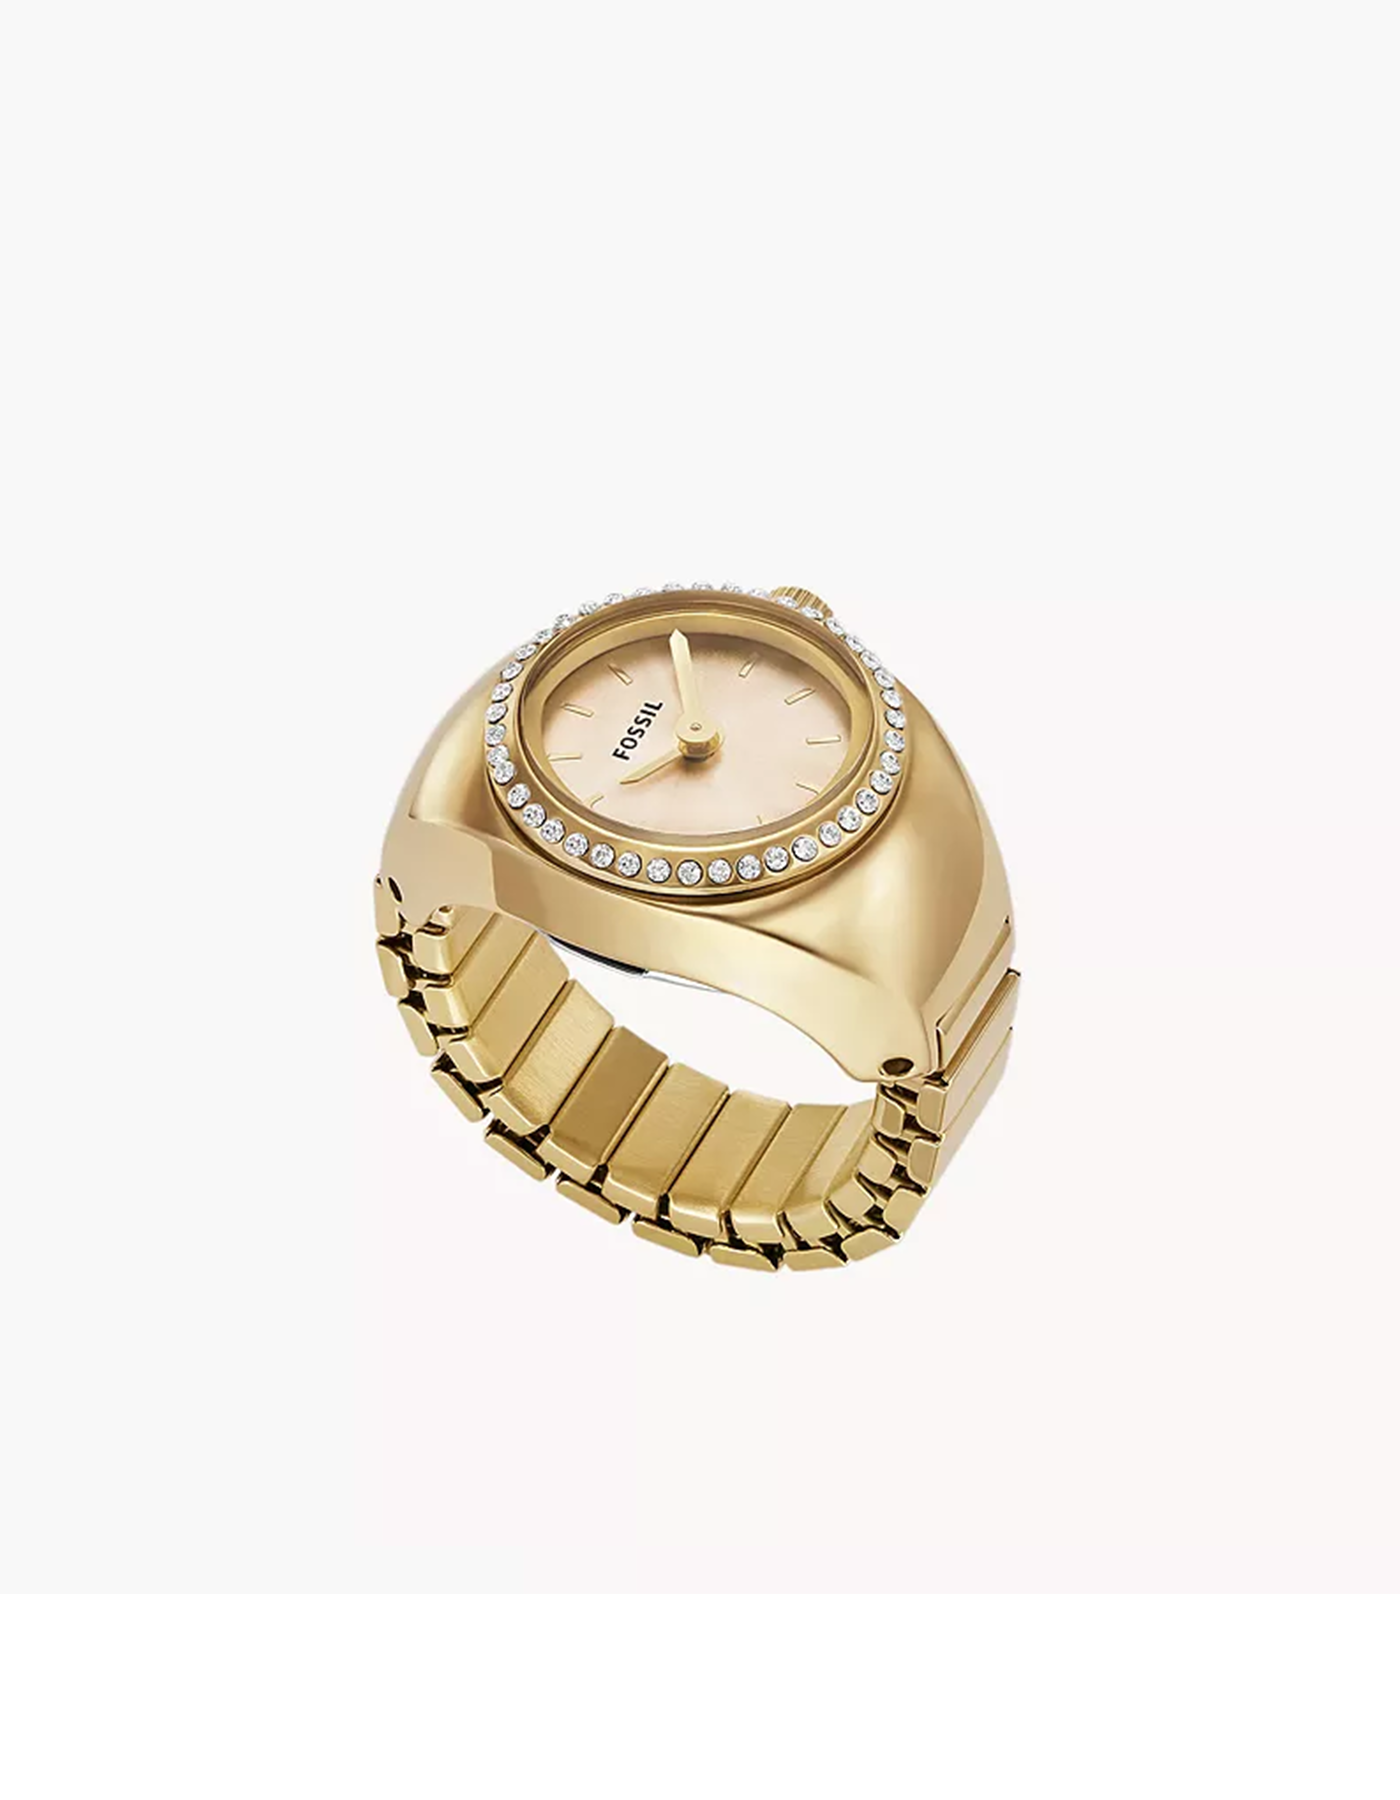 Fossil Watch Ring Rose Gold SS | Watches.com